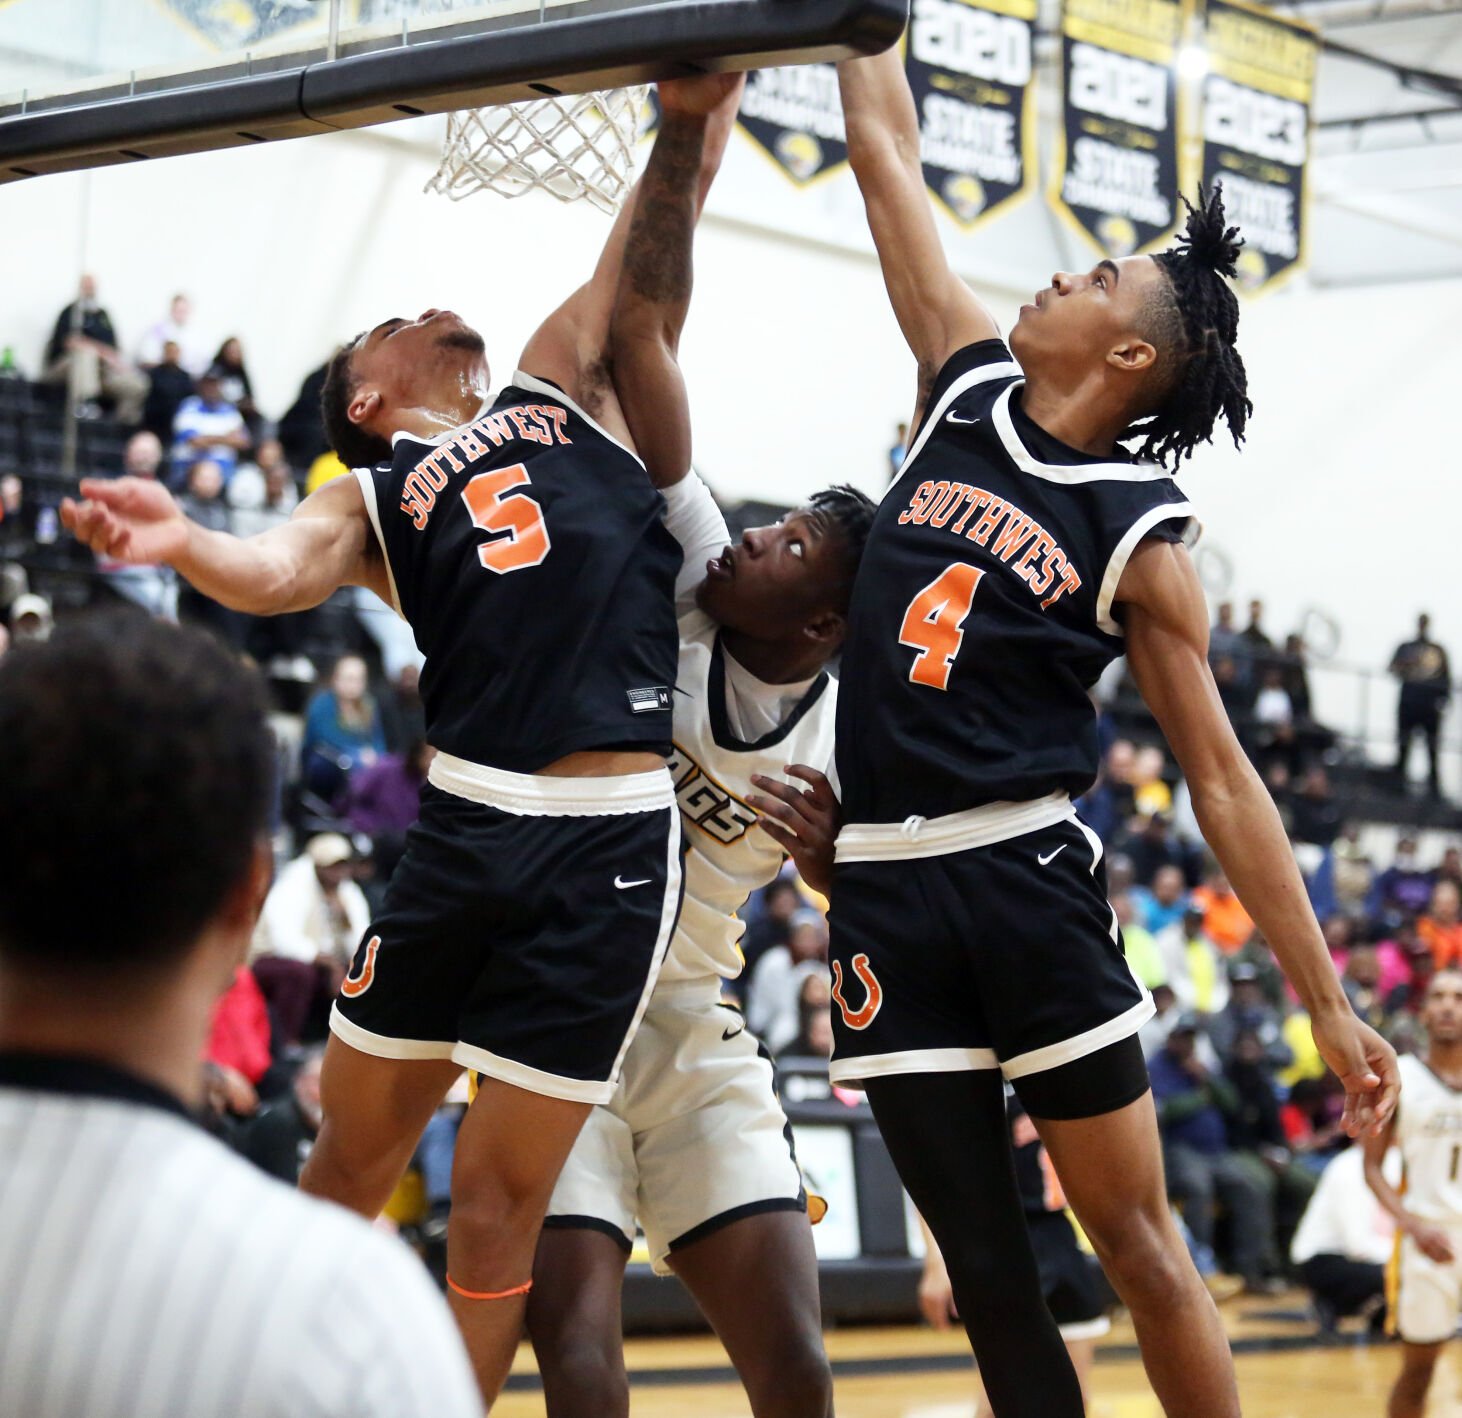 High school basketball: Three top seeds remain in huint